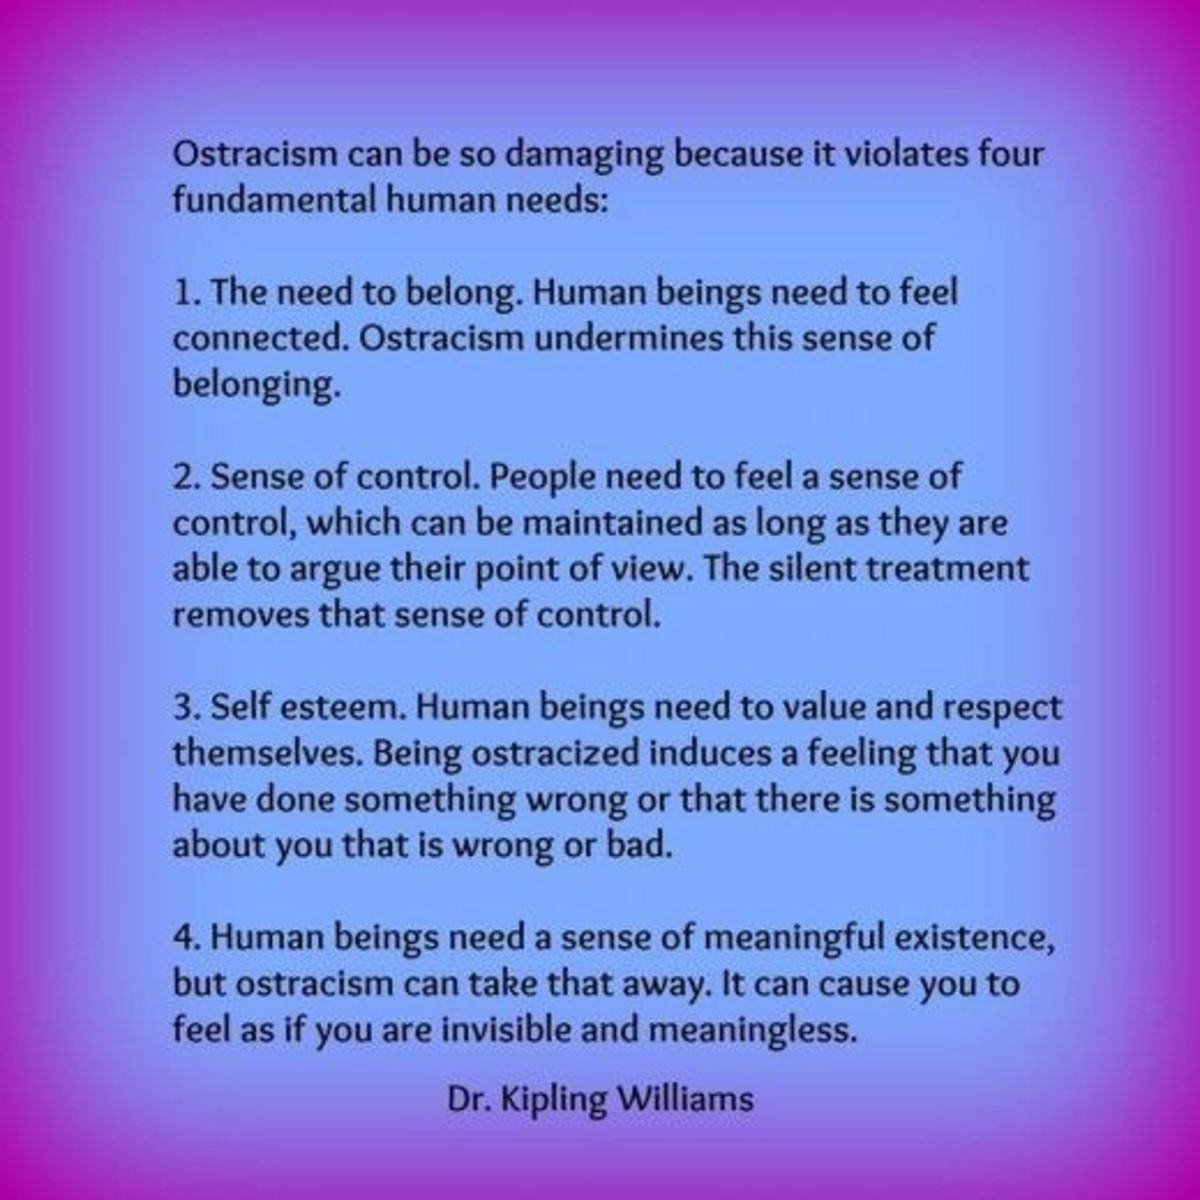 Quote by Dr. Kipling Williams of the Univerity of South Wales, video no longer available on YouTube.